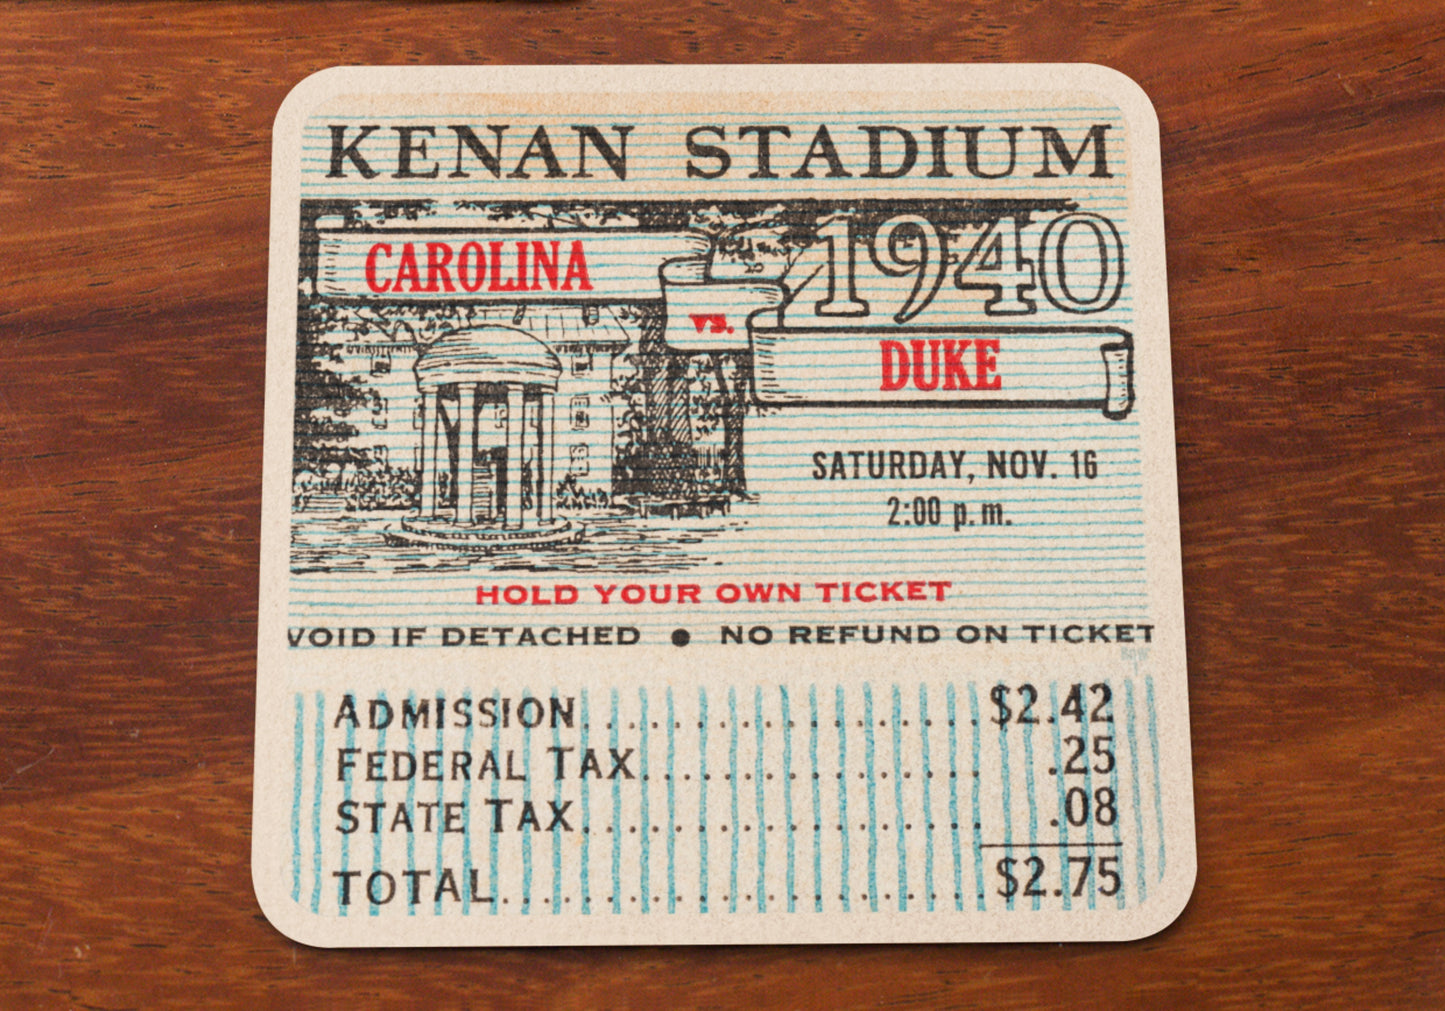 1940 North Carolina vs. Duke Football Ticket Drink Coasters with artwork depicting the University of North Carolina campus. Price of admission was $2.75. Birch Wood Drink Coasters Made in the U.S.A.